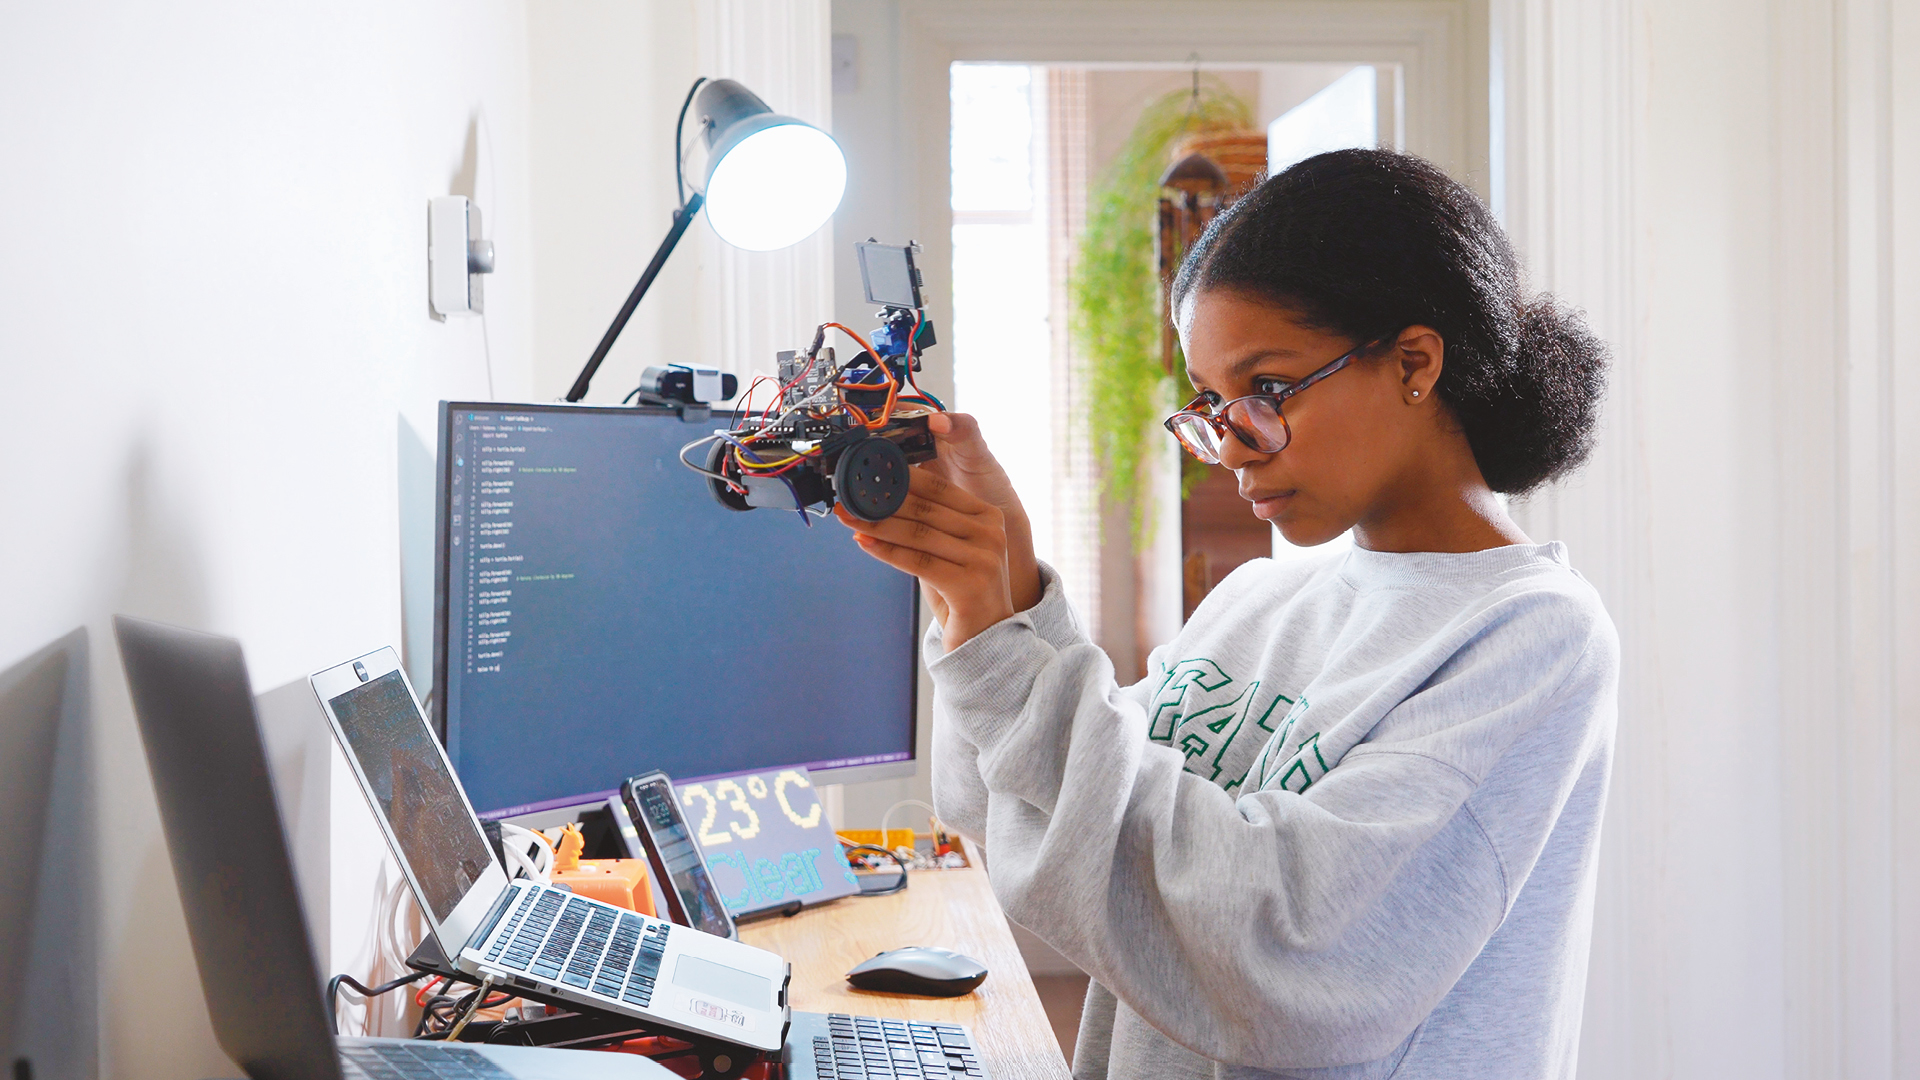 Changemakers: Girls into Coding